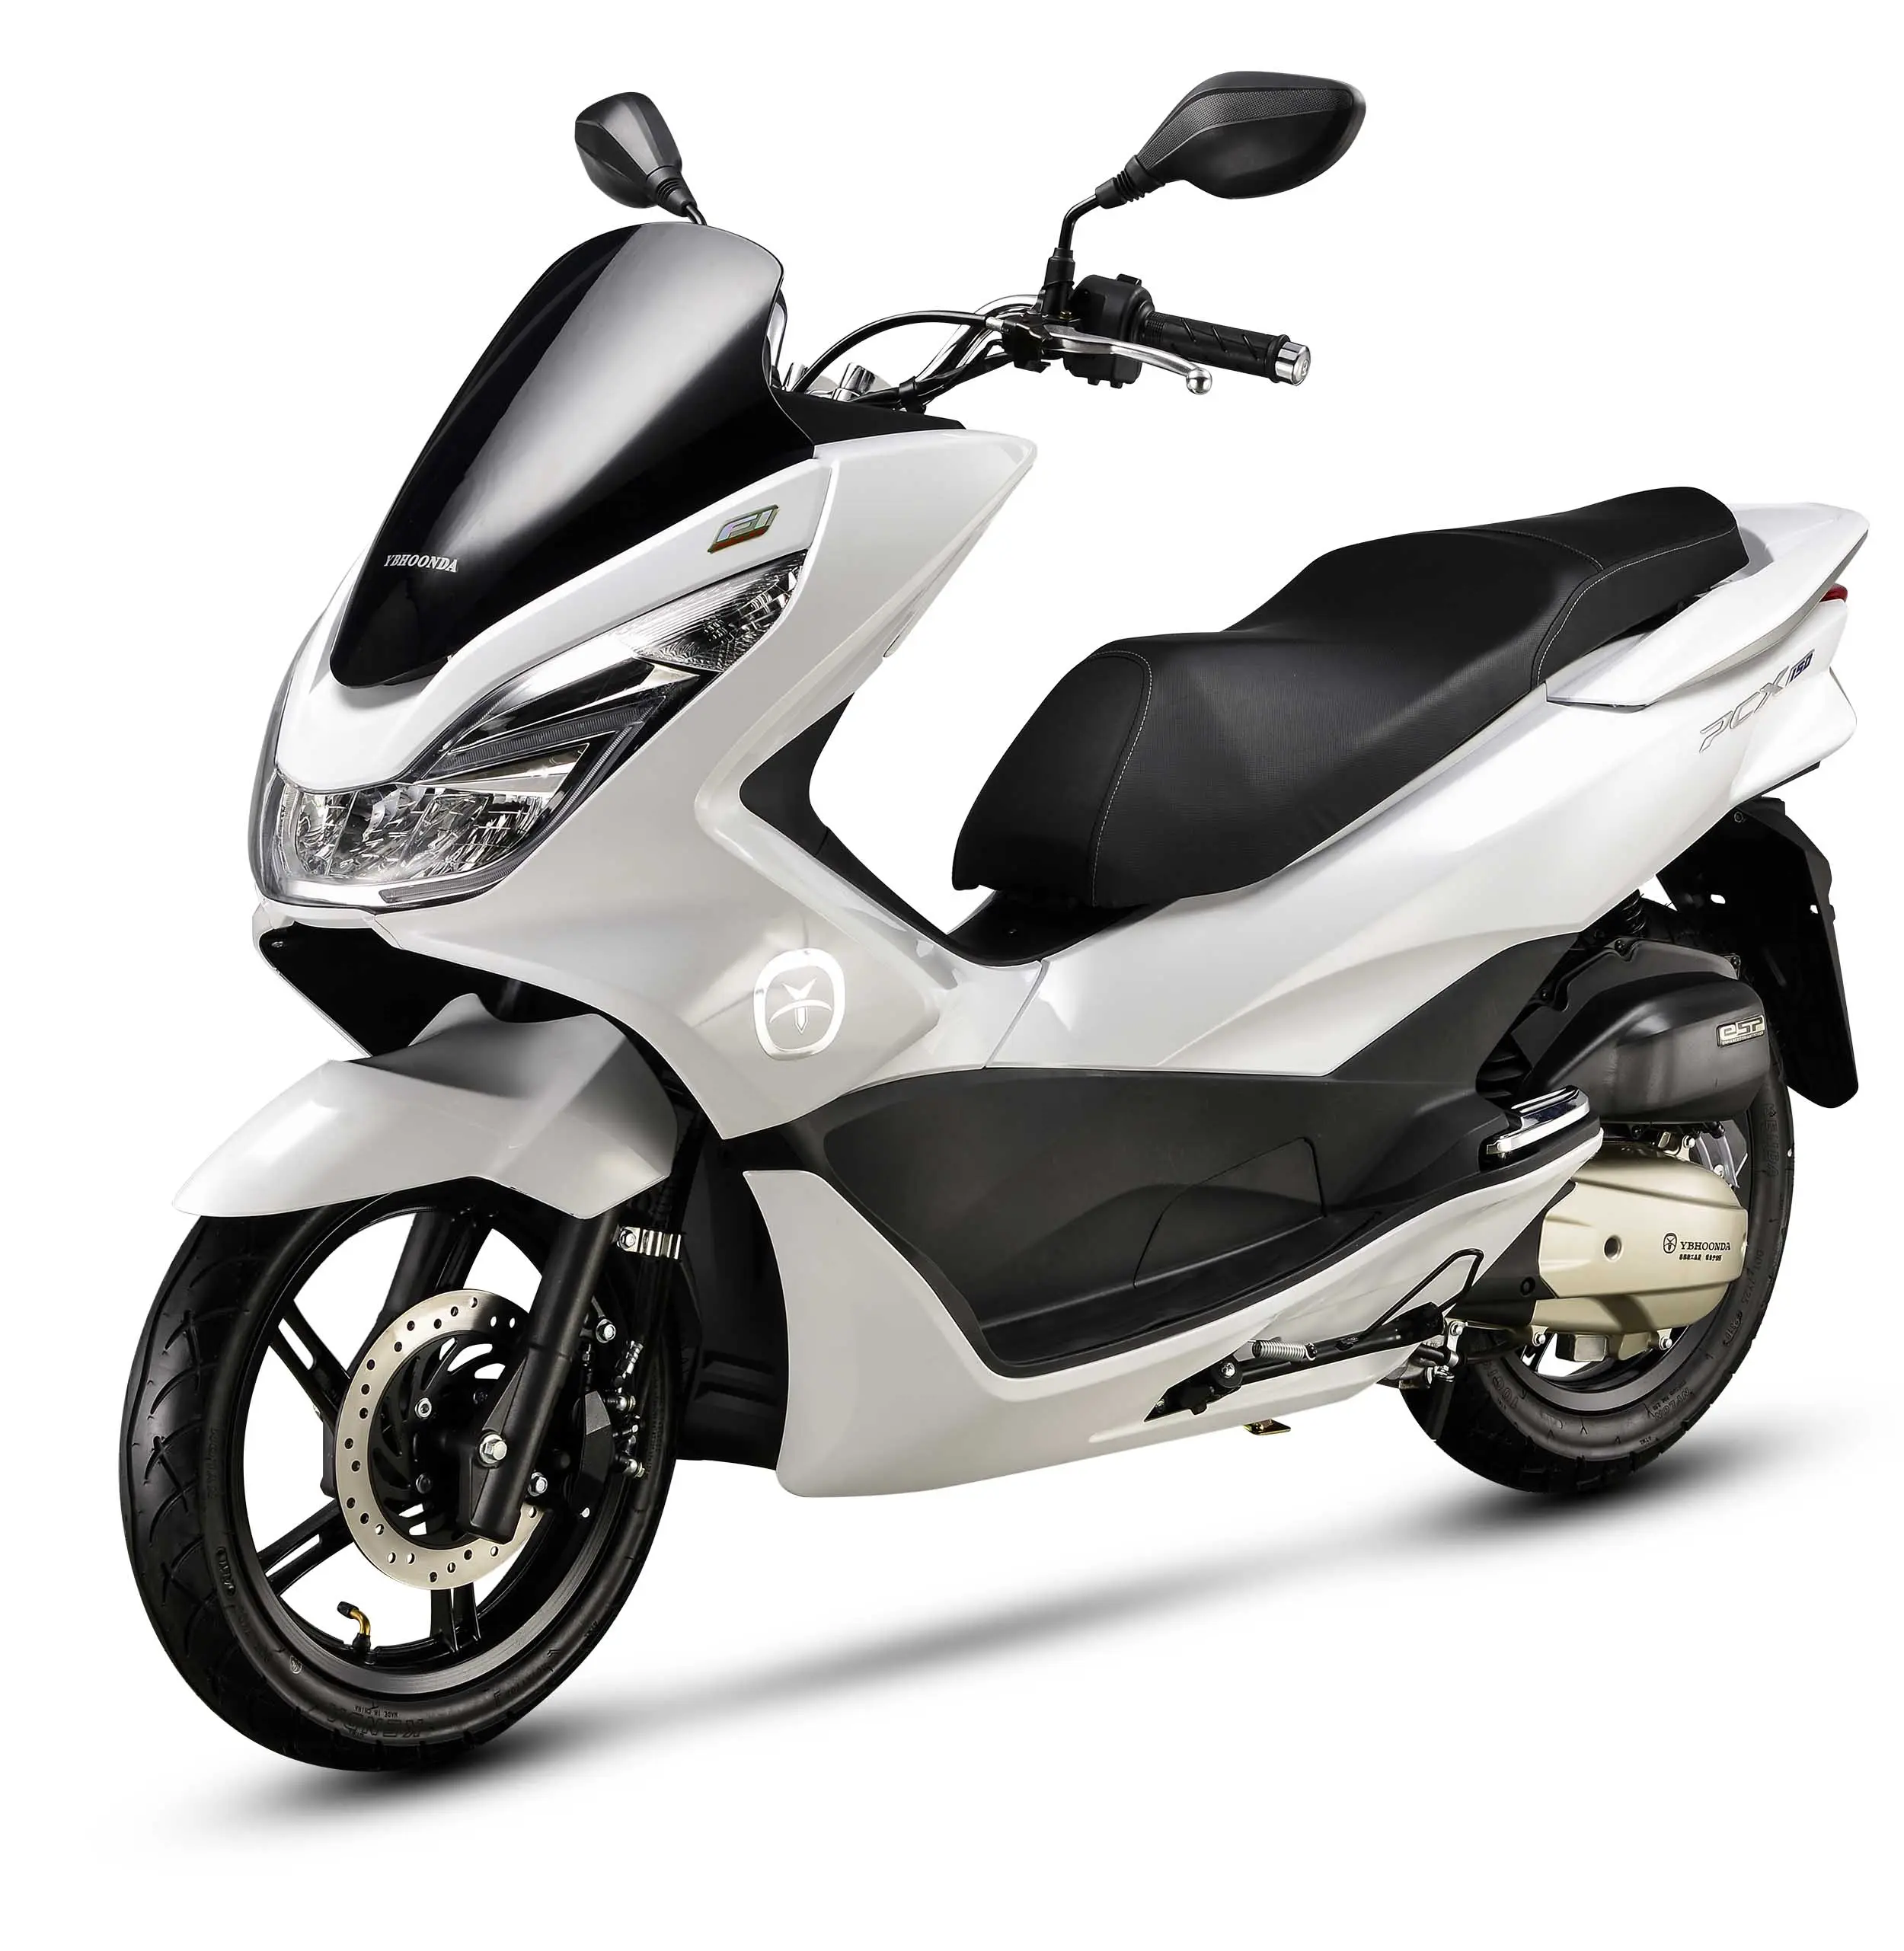 PCX 150 CVT EFI Motor Moped Scooter Mobilität Großes sportliches <span class=keywords><strong>Motorrad</strong></span> Doppels ch eiben bremse Digitaler Tachometer Benzin <span class=keywords><strong>Motorrad</strong></span>